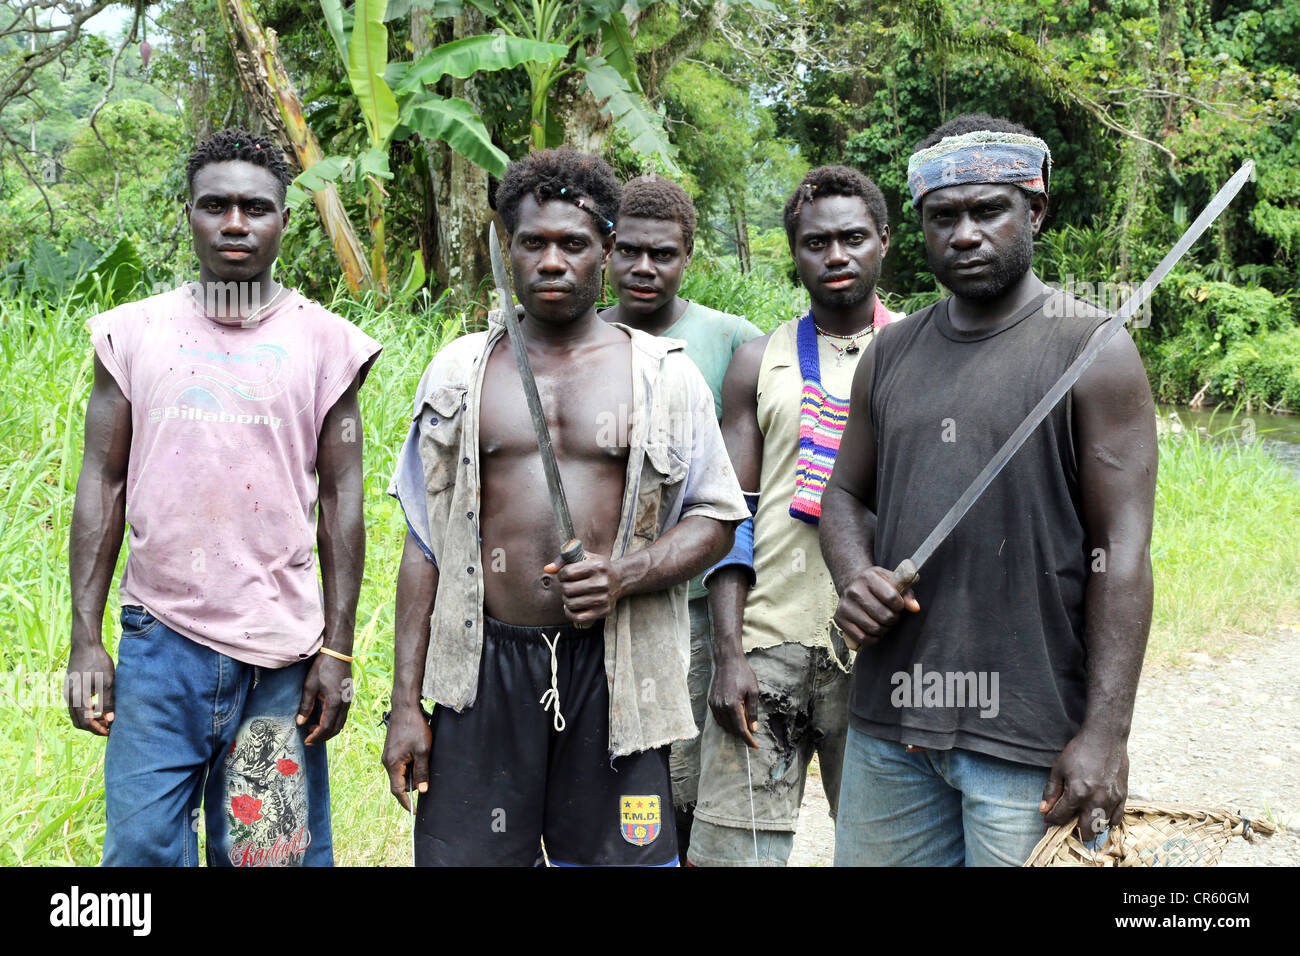 young men with clubs in the jungles of Bougainville Island, Papua New Guinea Stock Photo